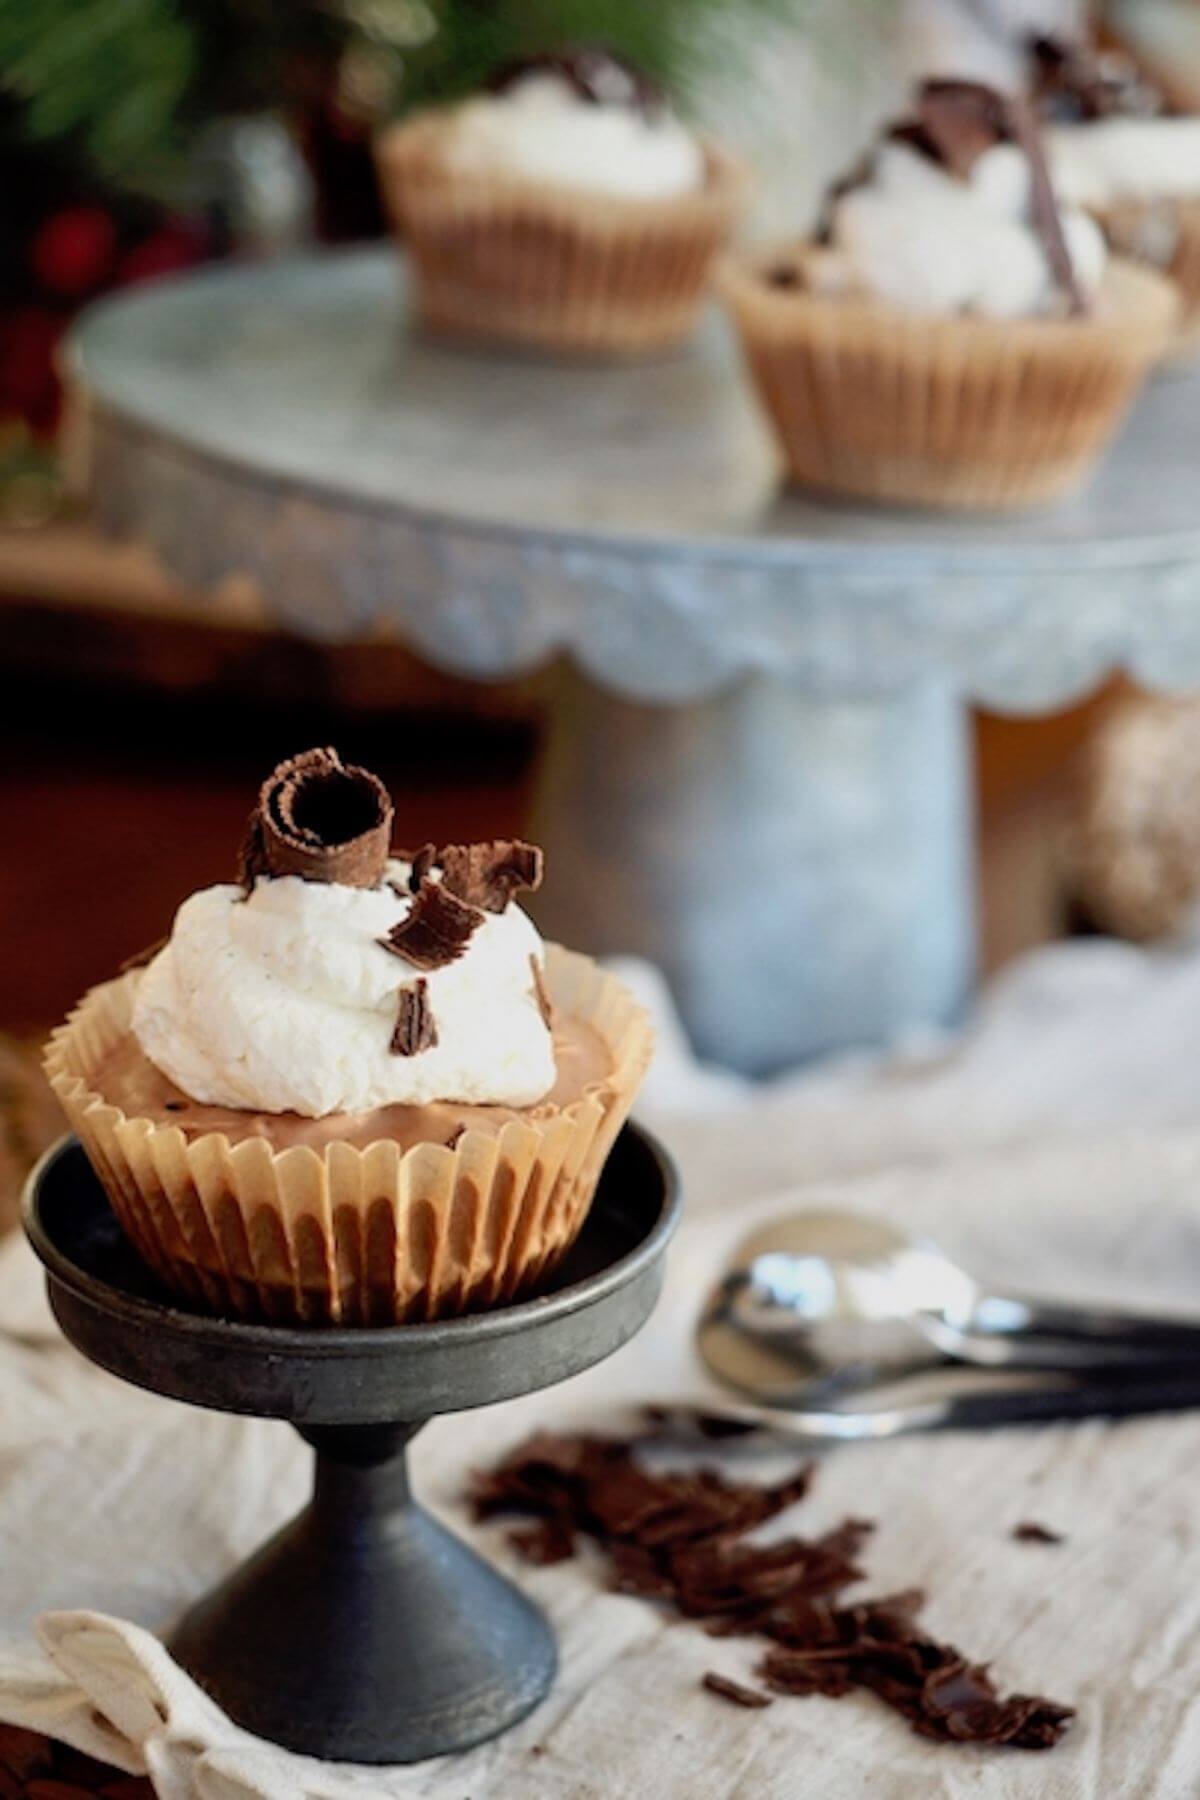 Mini chocolate pie on small pedestal for serving.